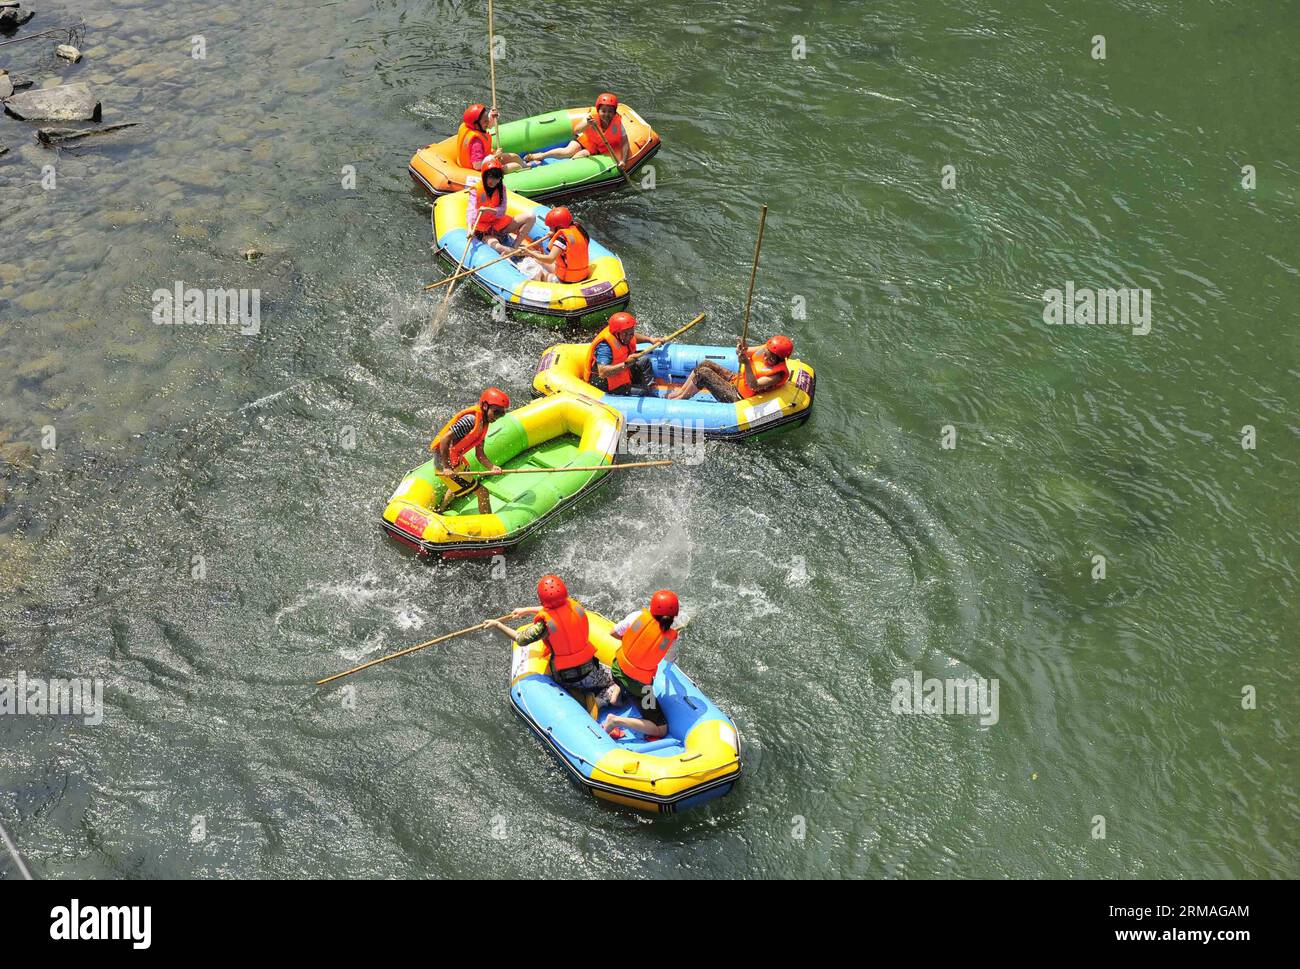 (140708) -- XIANFENG, July 8, 2014 (Xinhua) -- Tourists enjoy rafting within the Huangjindong Scenic Area in Xianfeng County, central China s Hubei Province, July 8, 2014. Many people sought refuge in whitewater rafting against the summer heat. (Xinhua/Yang Shunpi) (lmm) CHINA-SUMMER-LEISURE-RAFTING (CN) PUBLICATIONxNOTxINxCHN   Xian Feng July 8 2014 XINHUA tourists Enjoy Rafting Within The  Scenic Area in Xian Feng County Central China S Hubei Province July 8 2014 MANY Celebrities sought Refuge in Whitewater Rafting against The Summer Heat XINHUA Yang Shunpi lmm China Summer Leisure Rafting C Stock Photo